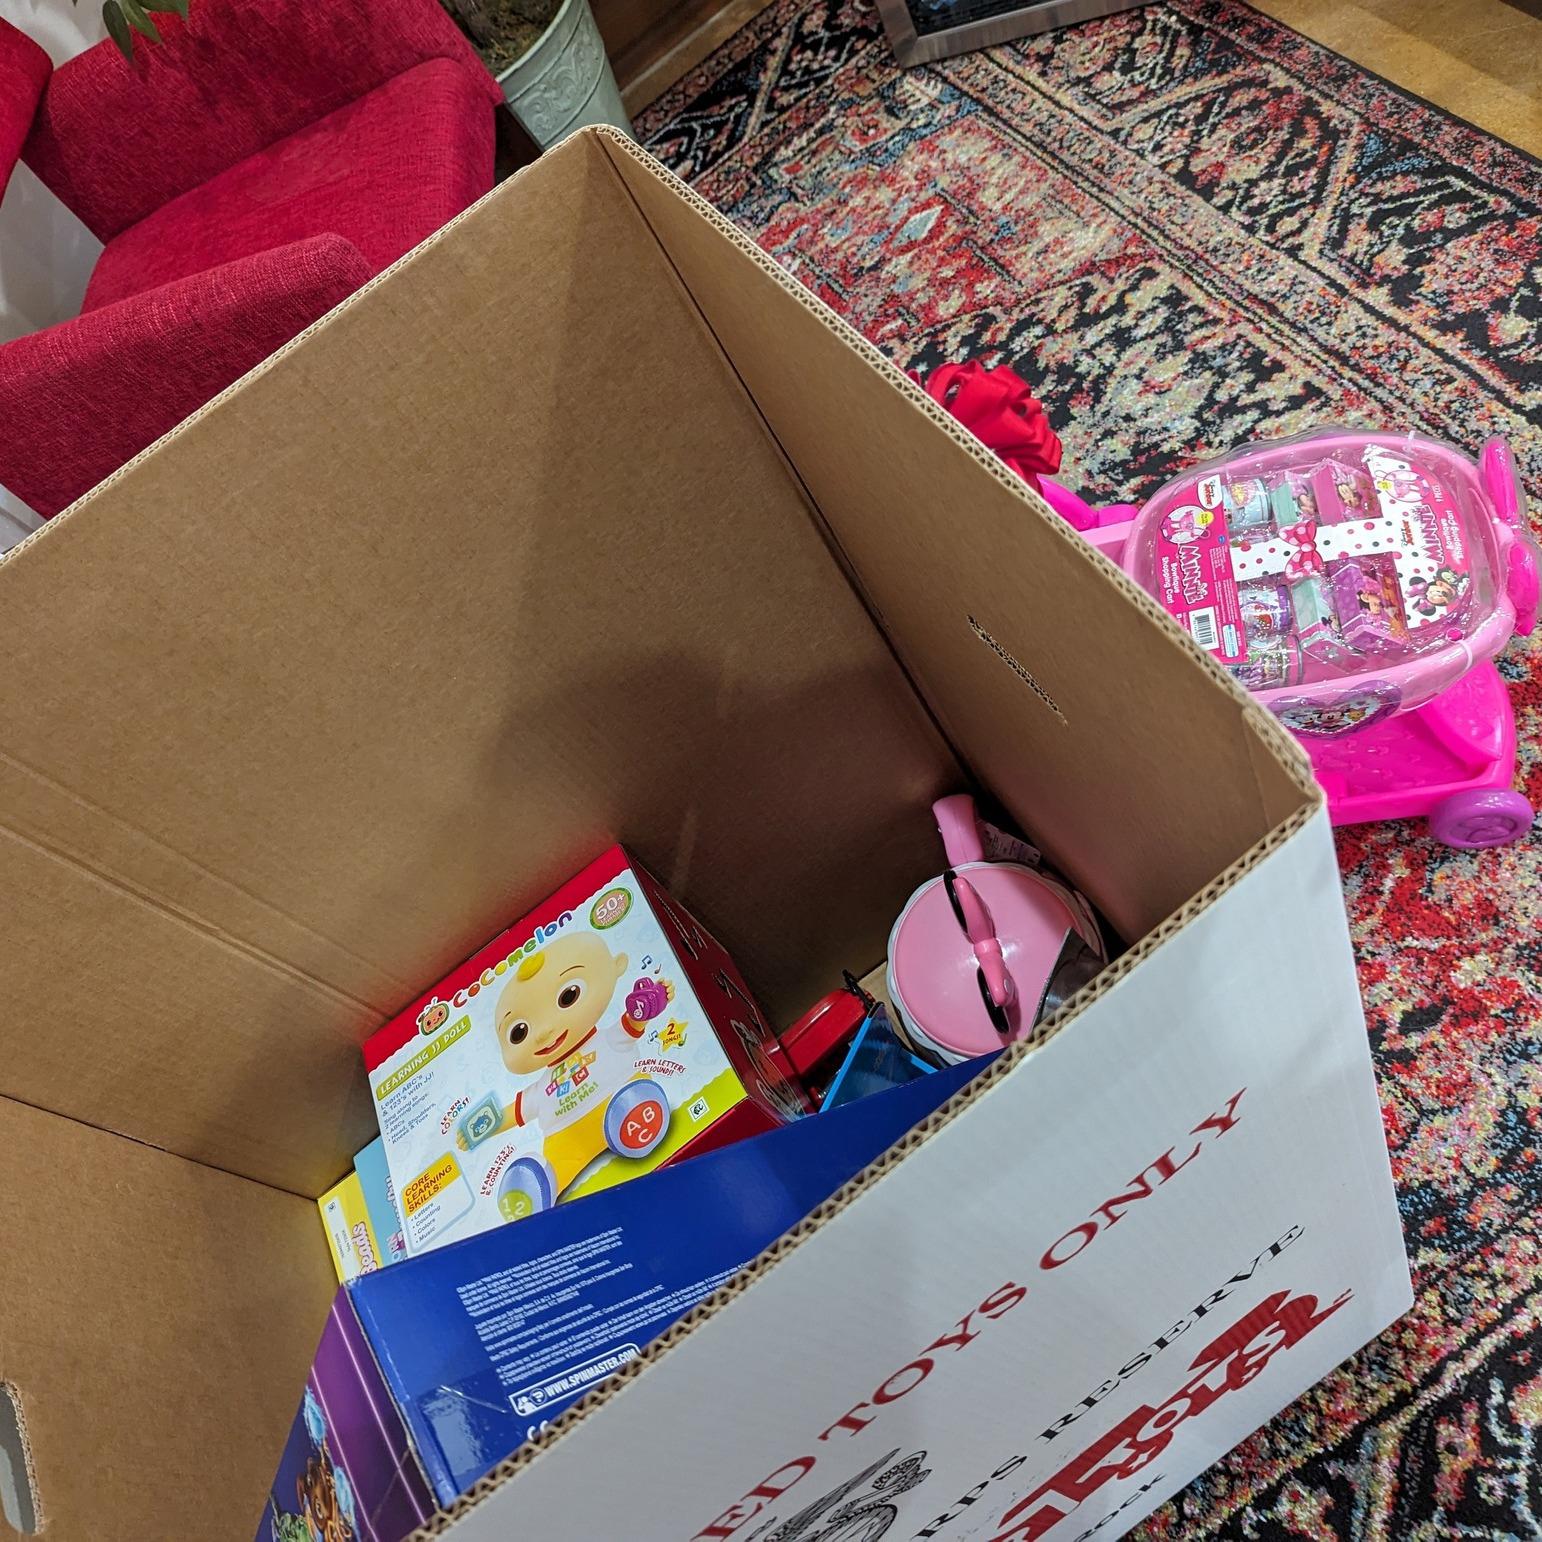 Toys are starting to arrive!! Drop off your unwrapped toy through December 10th.James Carlton SF 

** We cannot distribute toys or sign up for toys. We are a donation location only. **